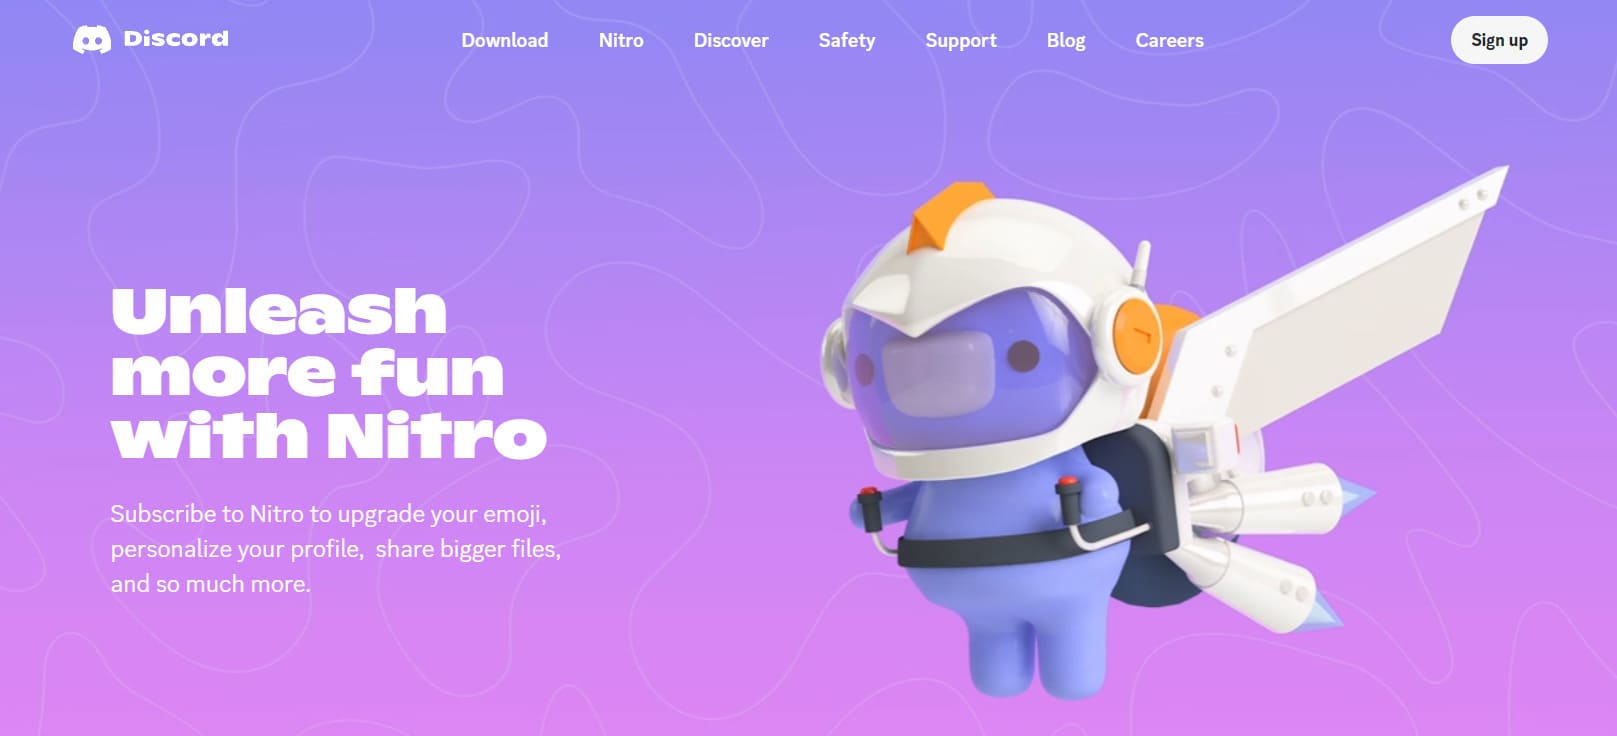 Instructions for using Discord Nitro for free